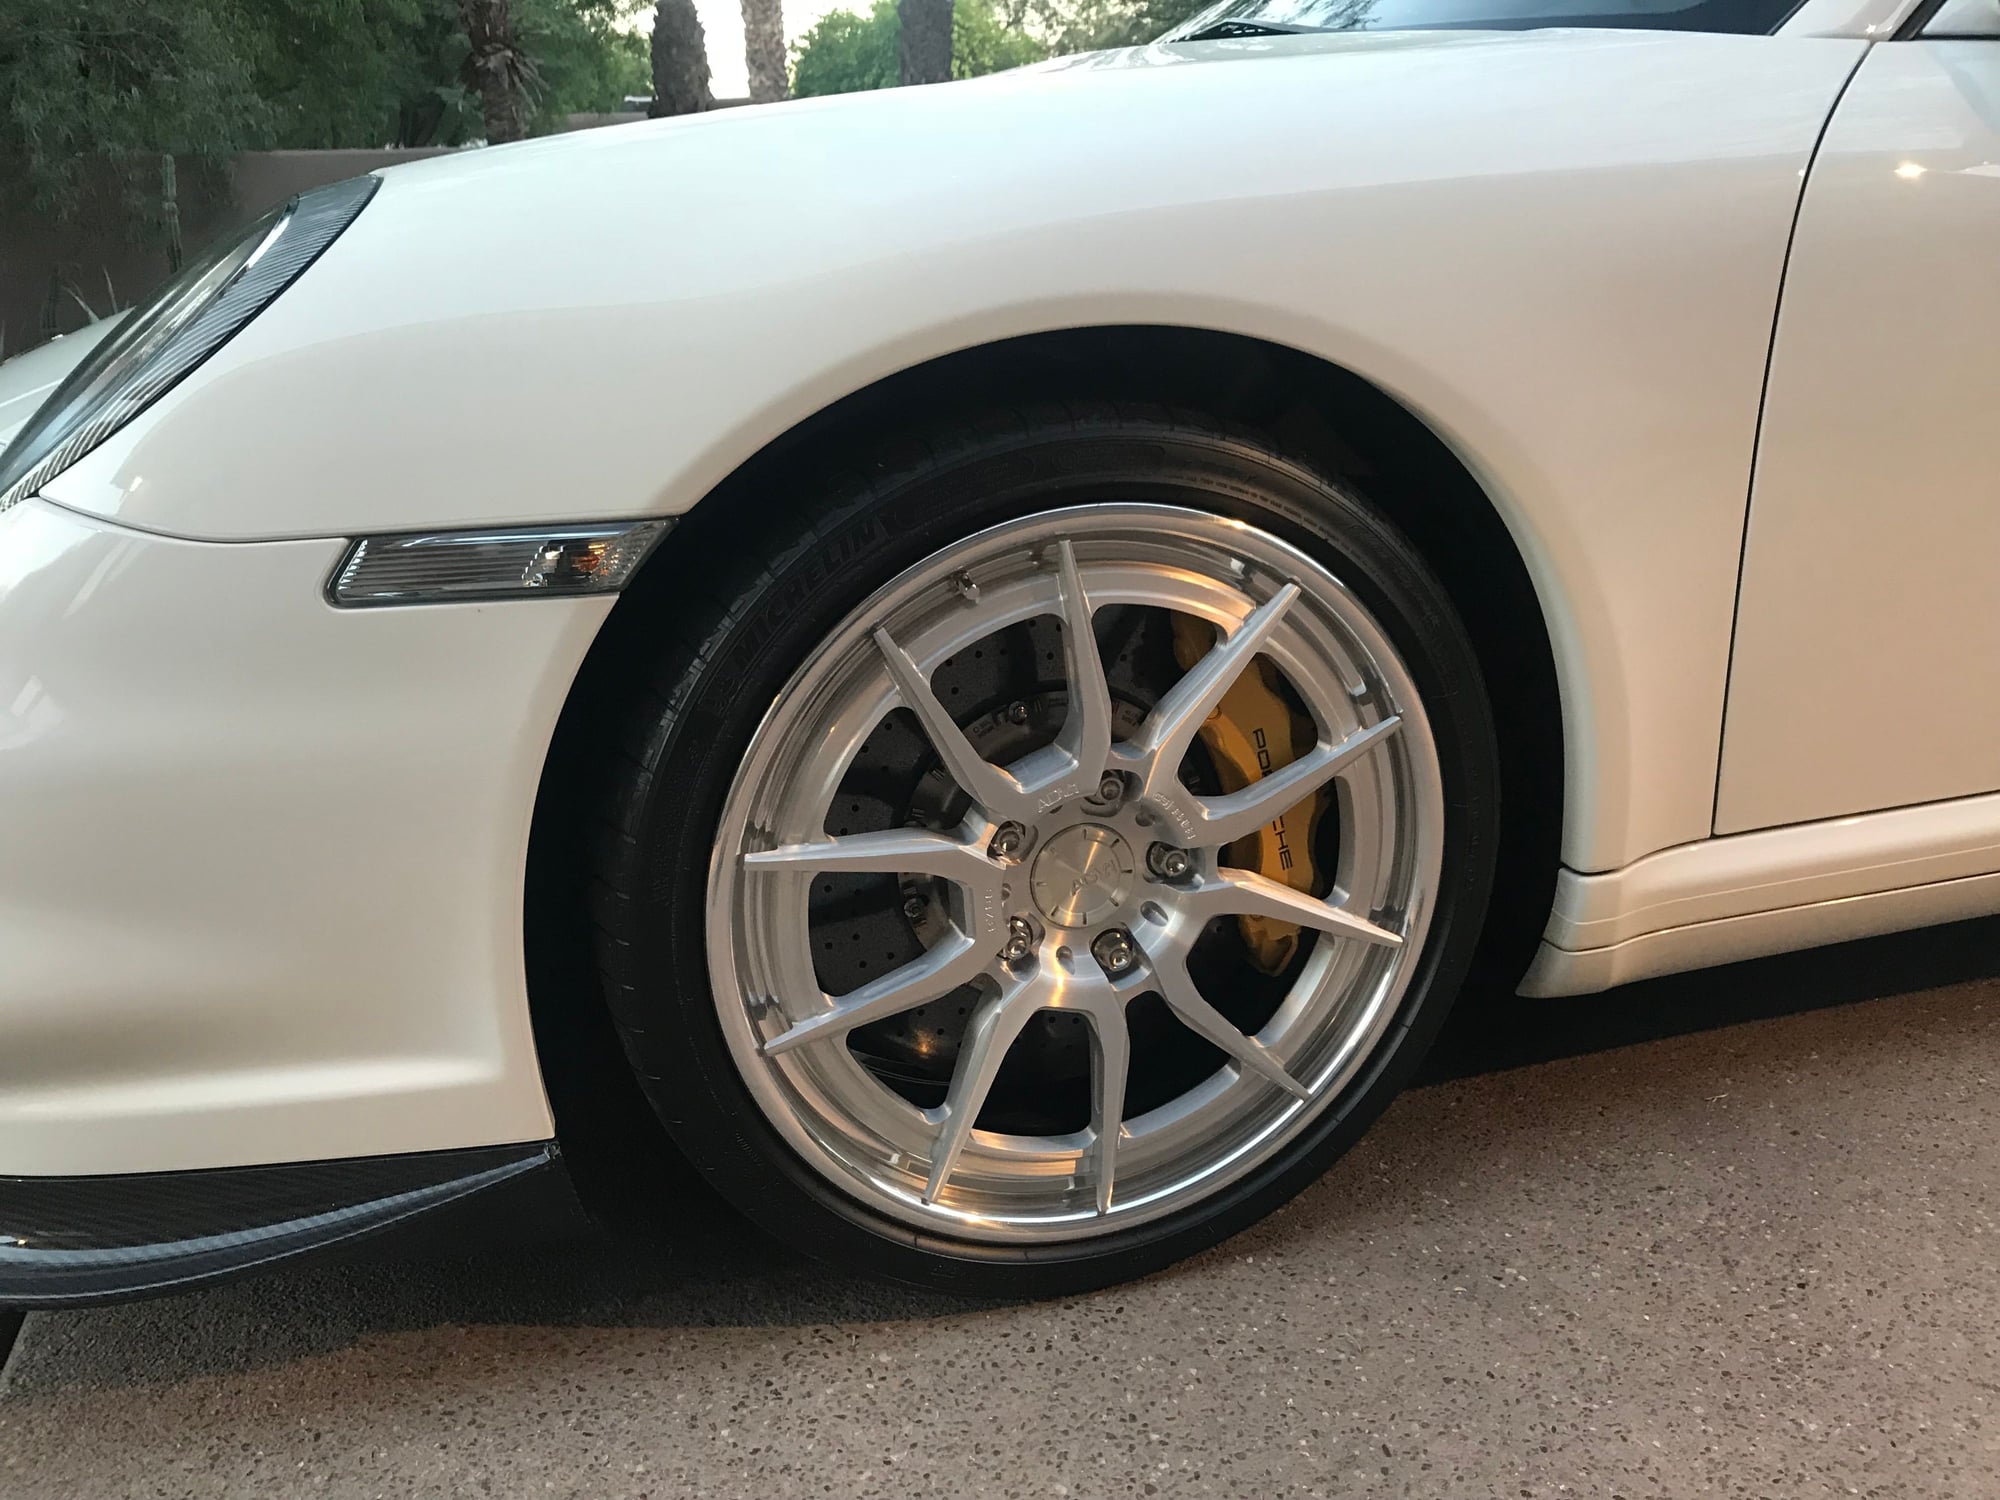 Wheels and Tires/Axles - Wheels for Sale ADV.1 - Used - 2005 to 2013 Porsche 911 - Paradise Valley, AZ 85253, United States